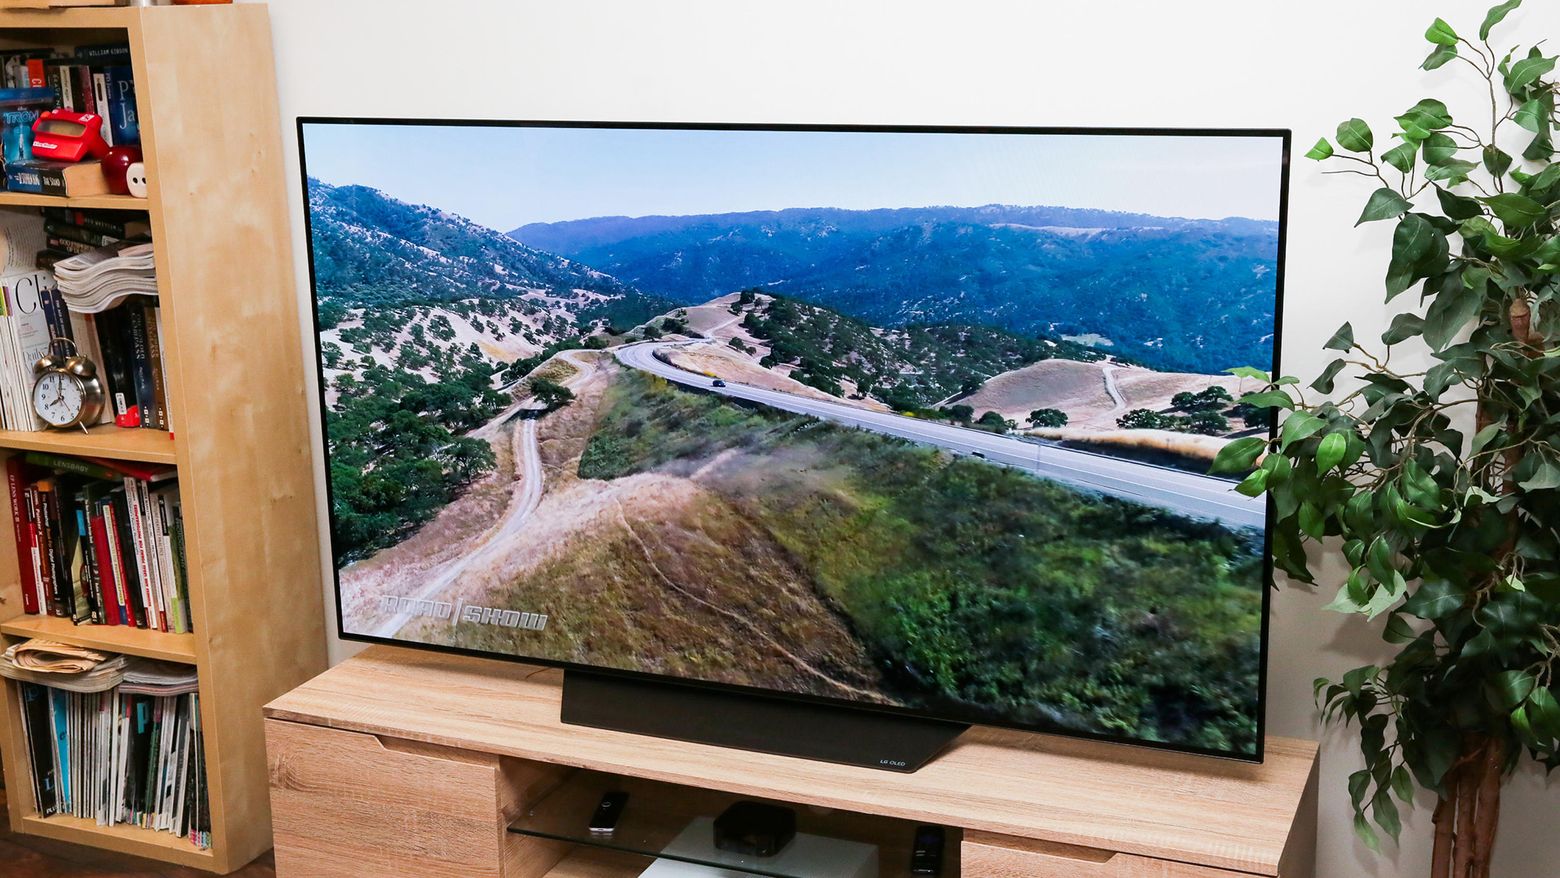 TCL adds Google TV smarts, streaming to 5-Series and 6-Series TVs - CNET